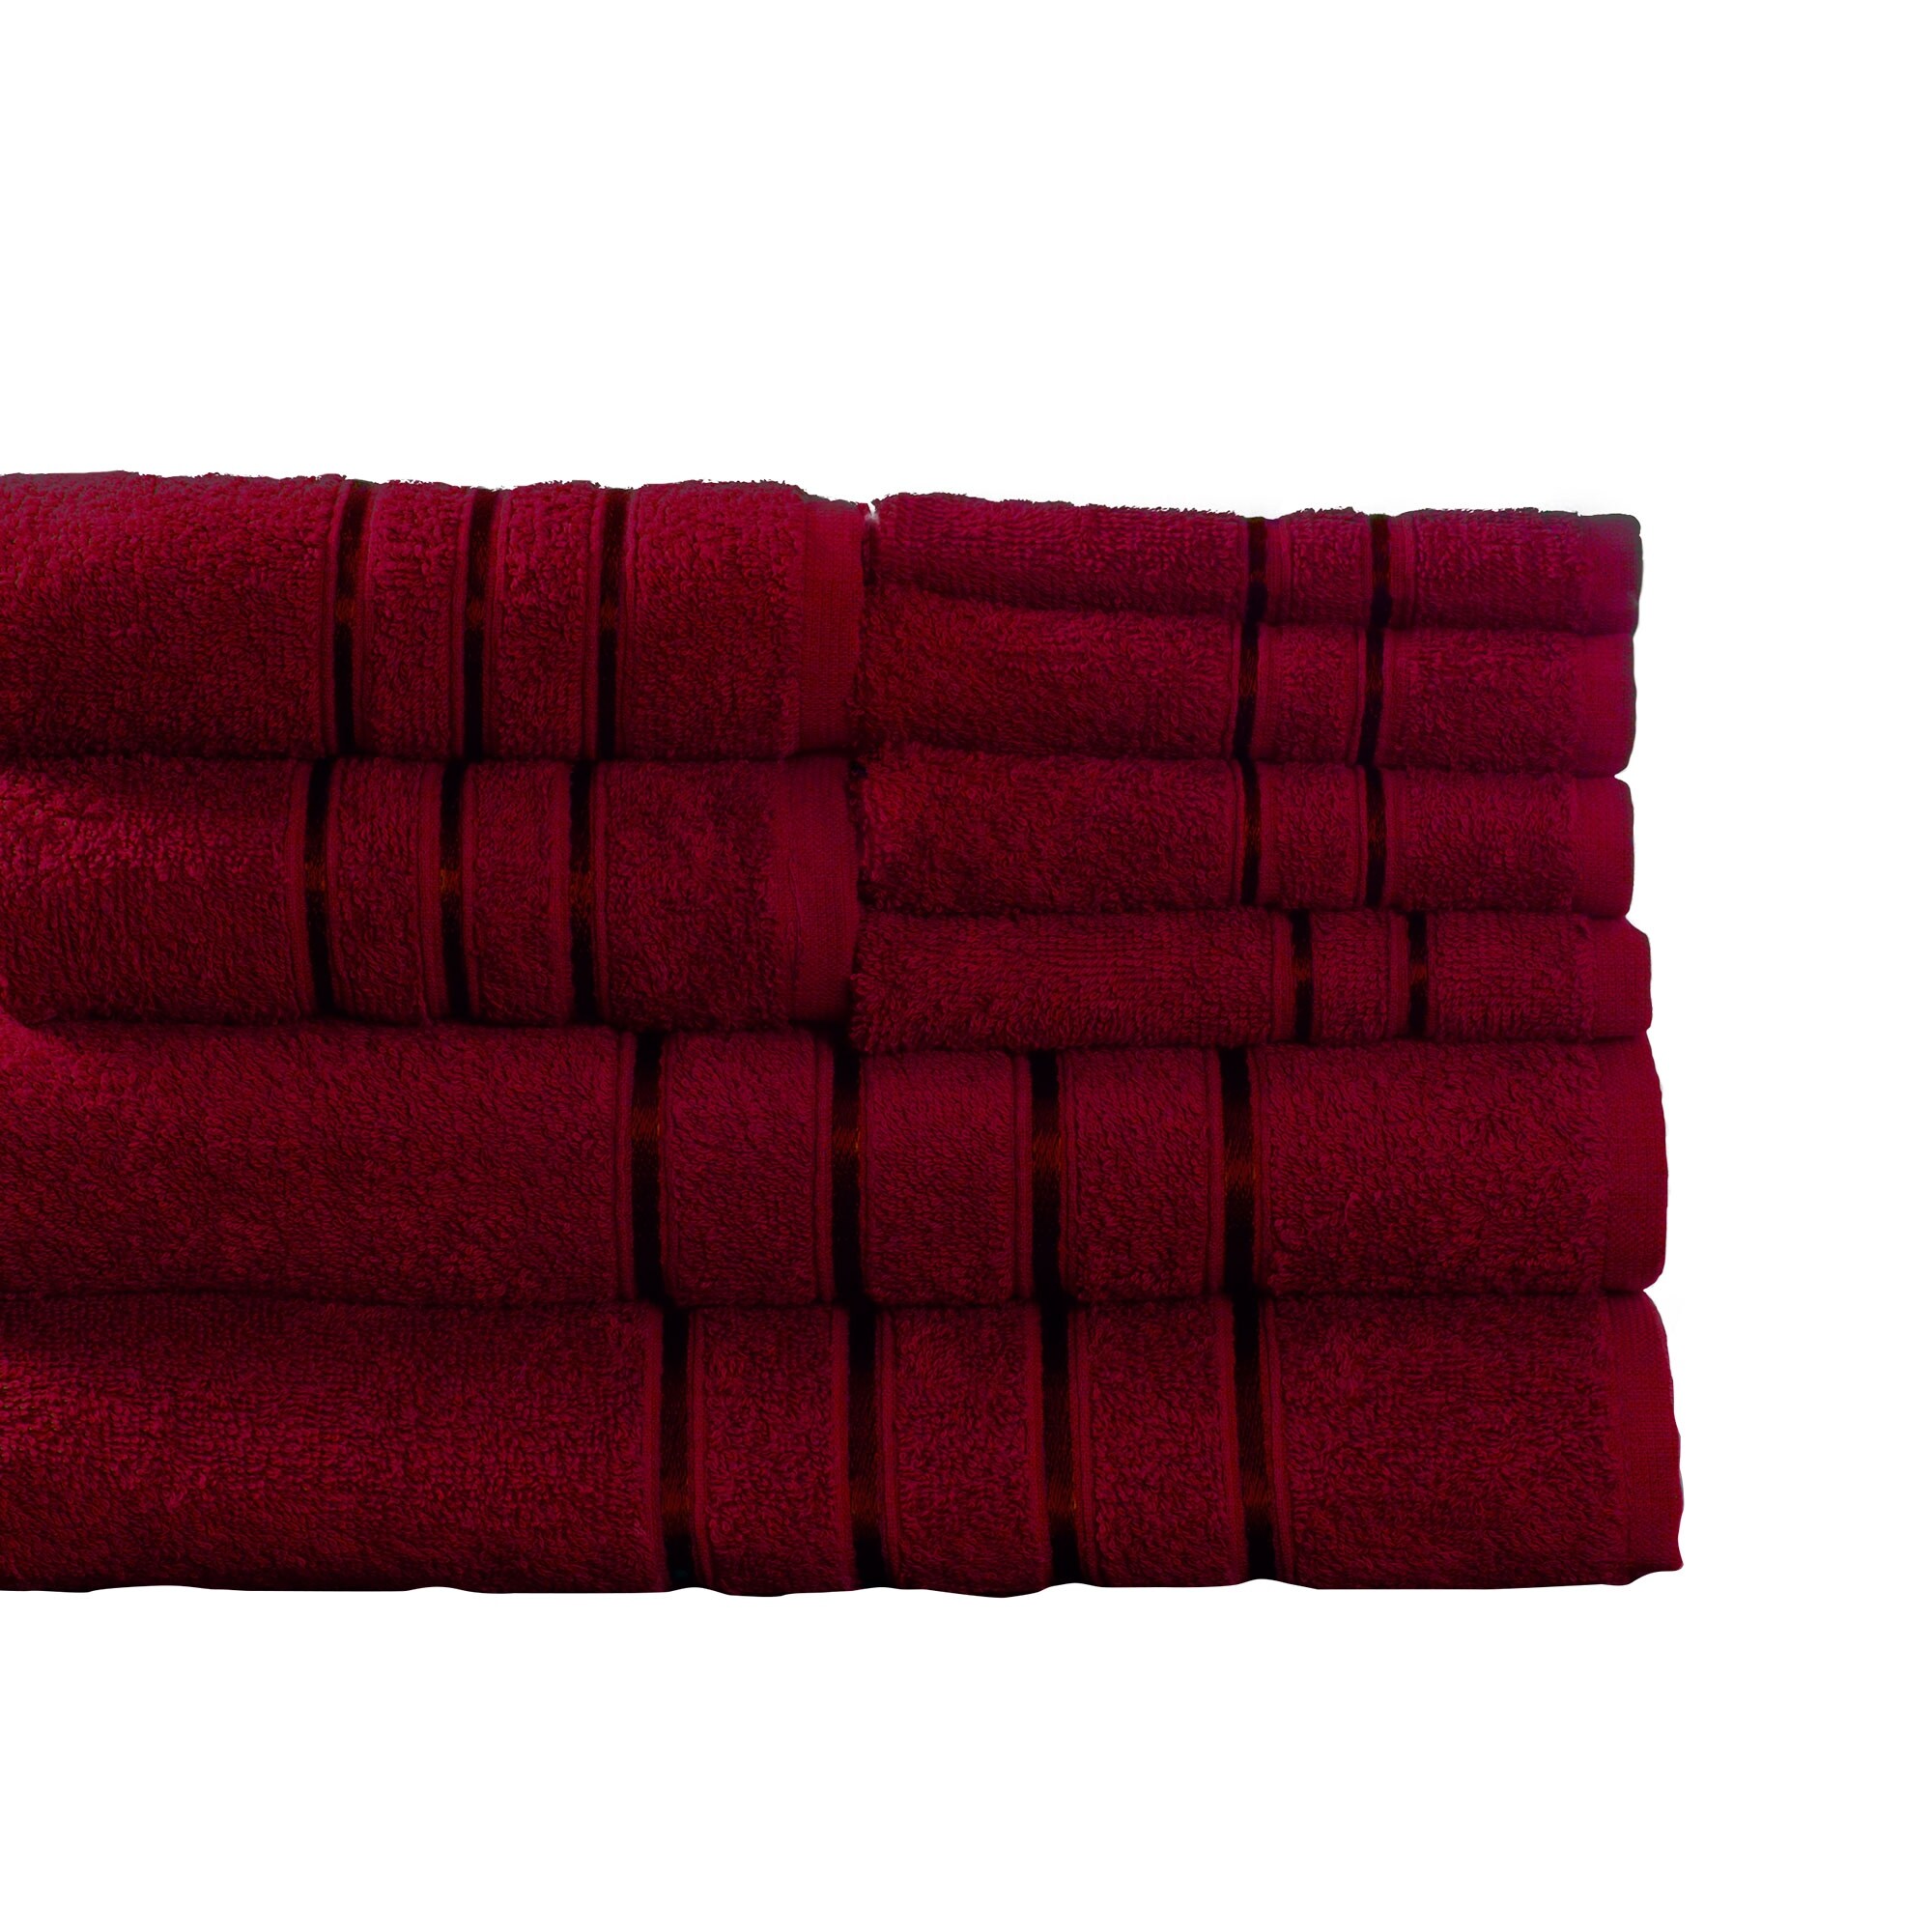 https://ak1.ostkcdn.com/images/products/is/images/direct/01b2860fc552b47fb5a24061acc0769adde1dea5/Washable-Bathroom-Towels---8-Piece-100%25-Cotton-Set-with-Washcloths%2C-2-Hand-Towels%2C-and-2-Bath-Towels-by-Lavish-Home-%28Burgundy%29.jpg